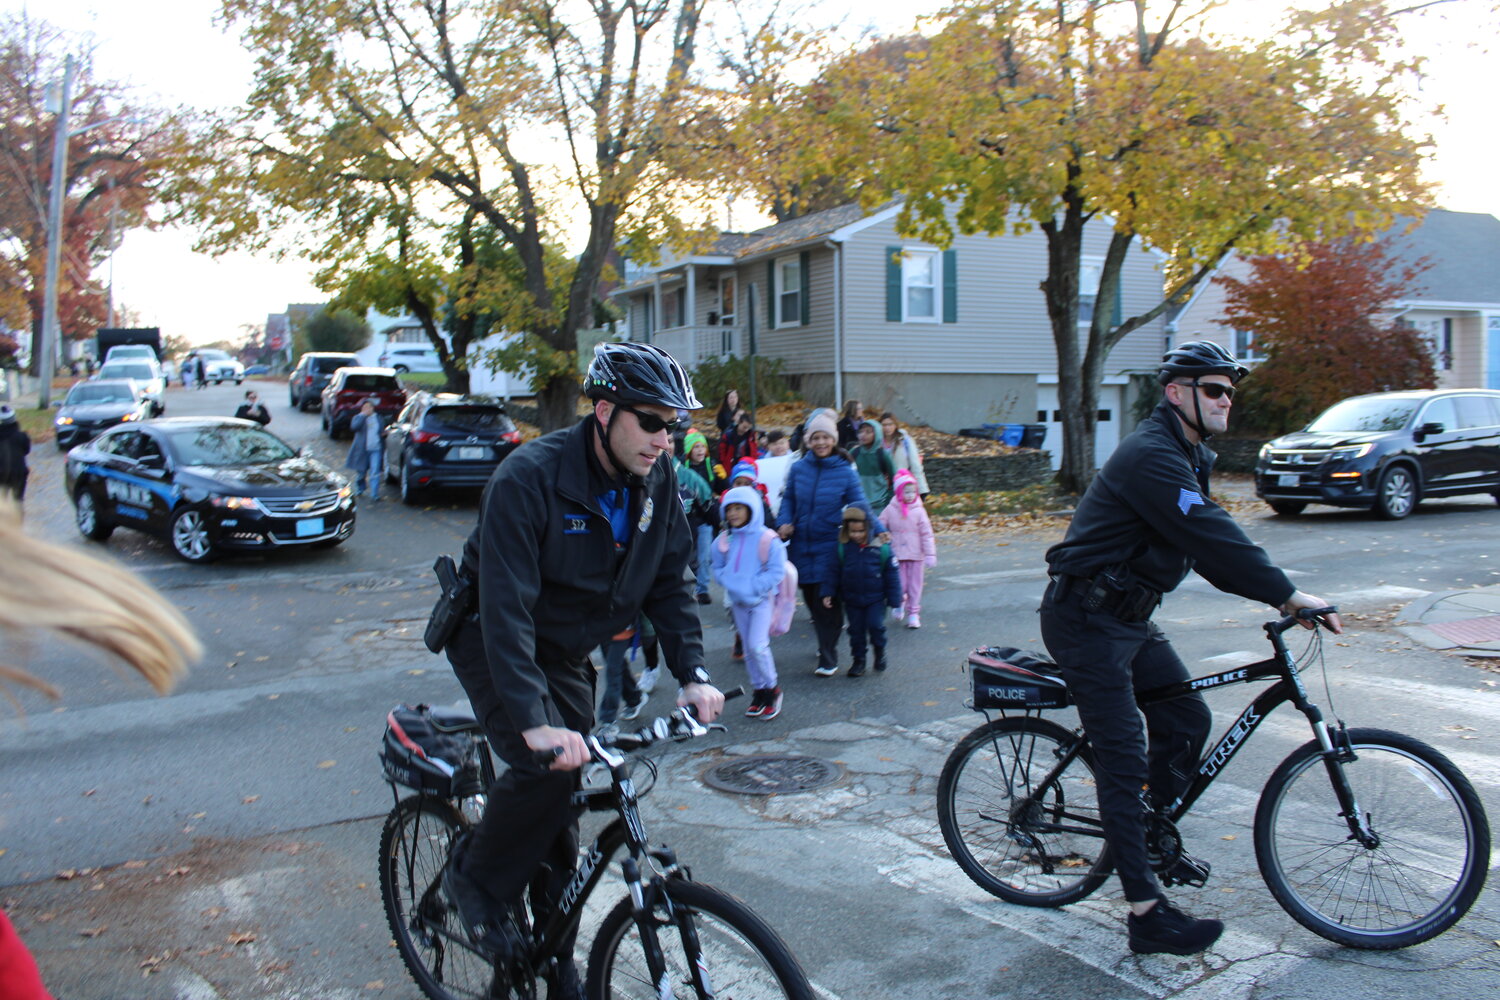 A MORNING BIKE RIDE: Law enforcement accompanied students, parents and teachers on their walk from Dave’s Marketplace down Chestnut Street to the Eden Park Elementary.